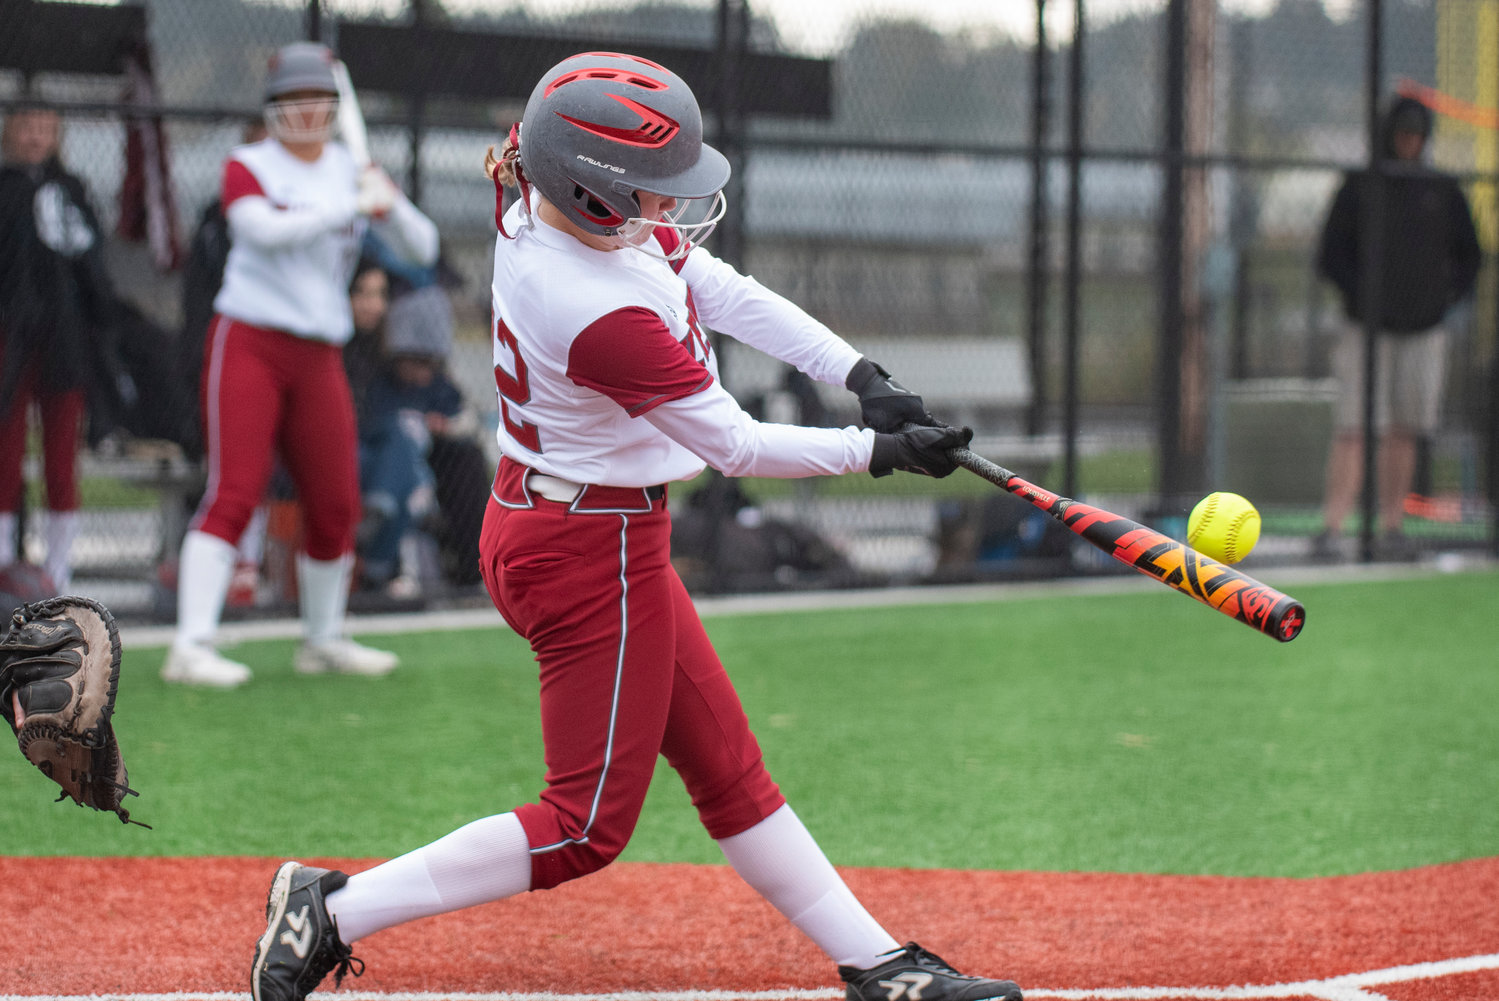 W.F. West's Avalon Myers connects on a Rochester pitch during a home game on April 13.